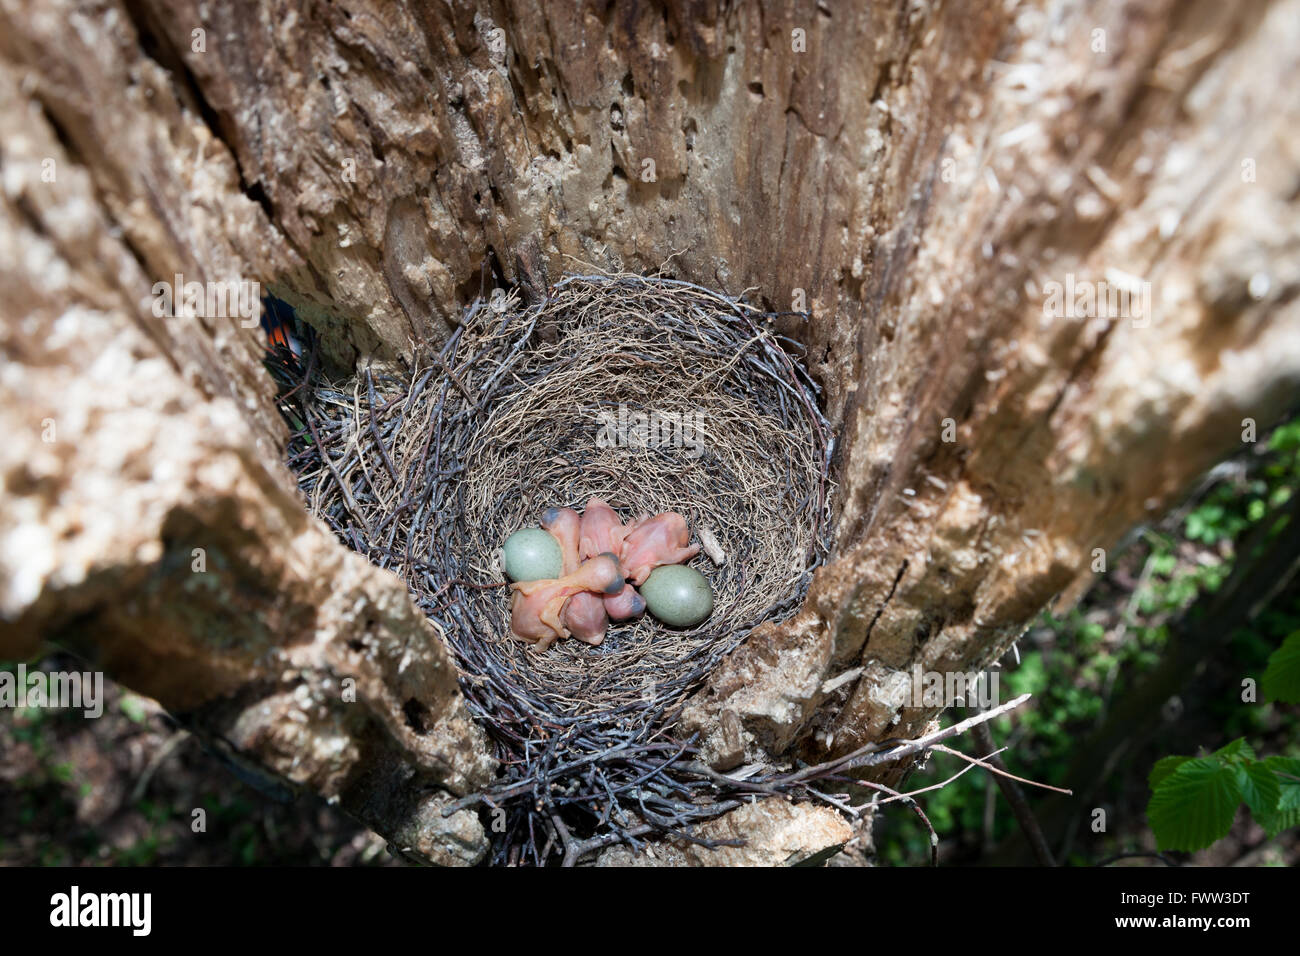 Garrulus glandarius. The nest of the Jay in nature. Moscow region, Russia Stock Photo